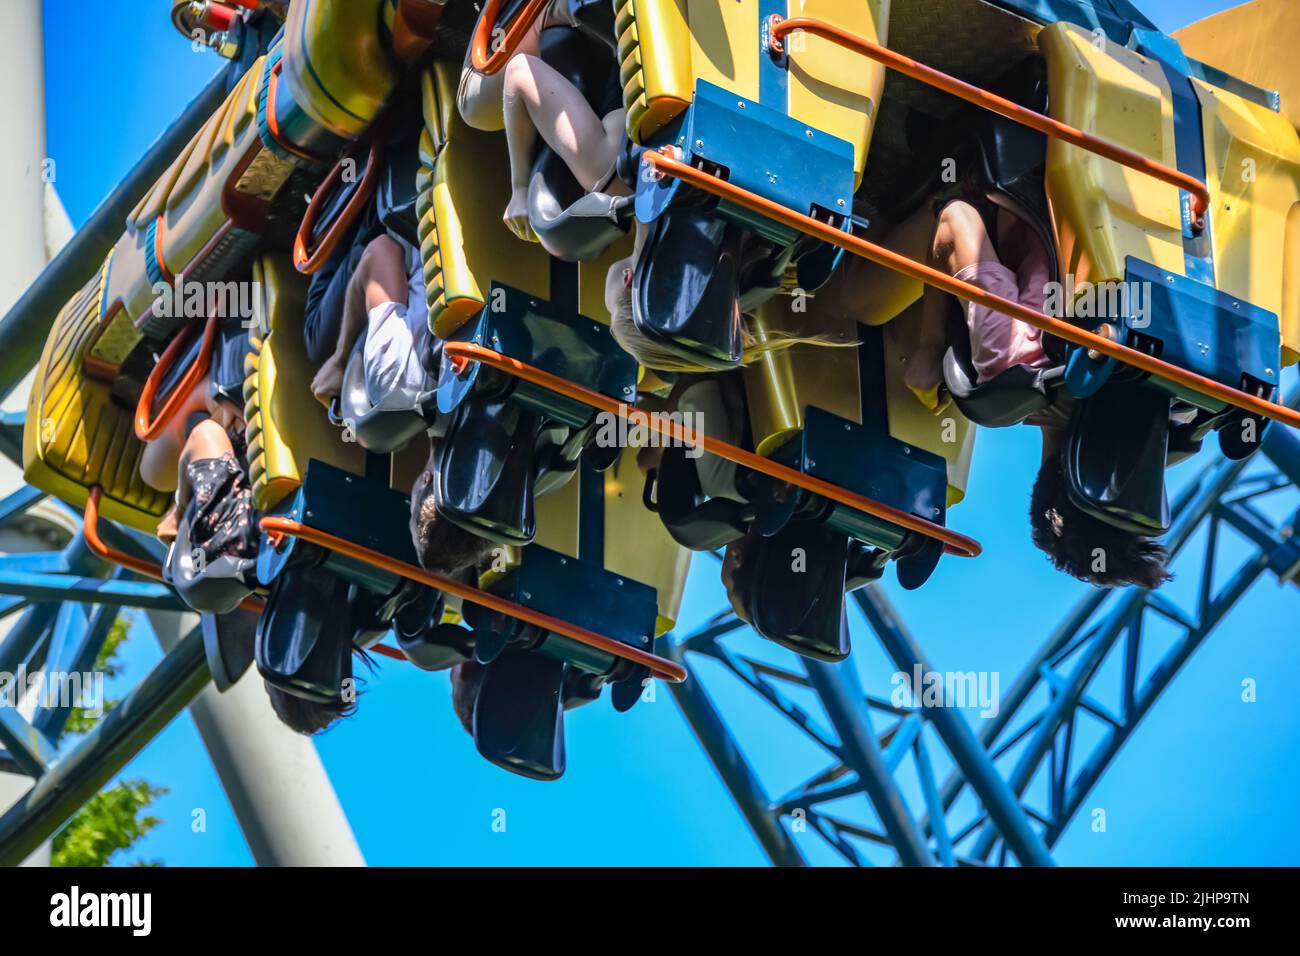 People ride 'Anubis The Ride', a steel roller coaster located at Plopsaland in Belgium Stock Photo